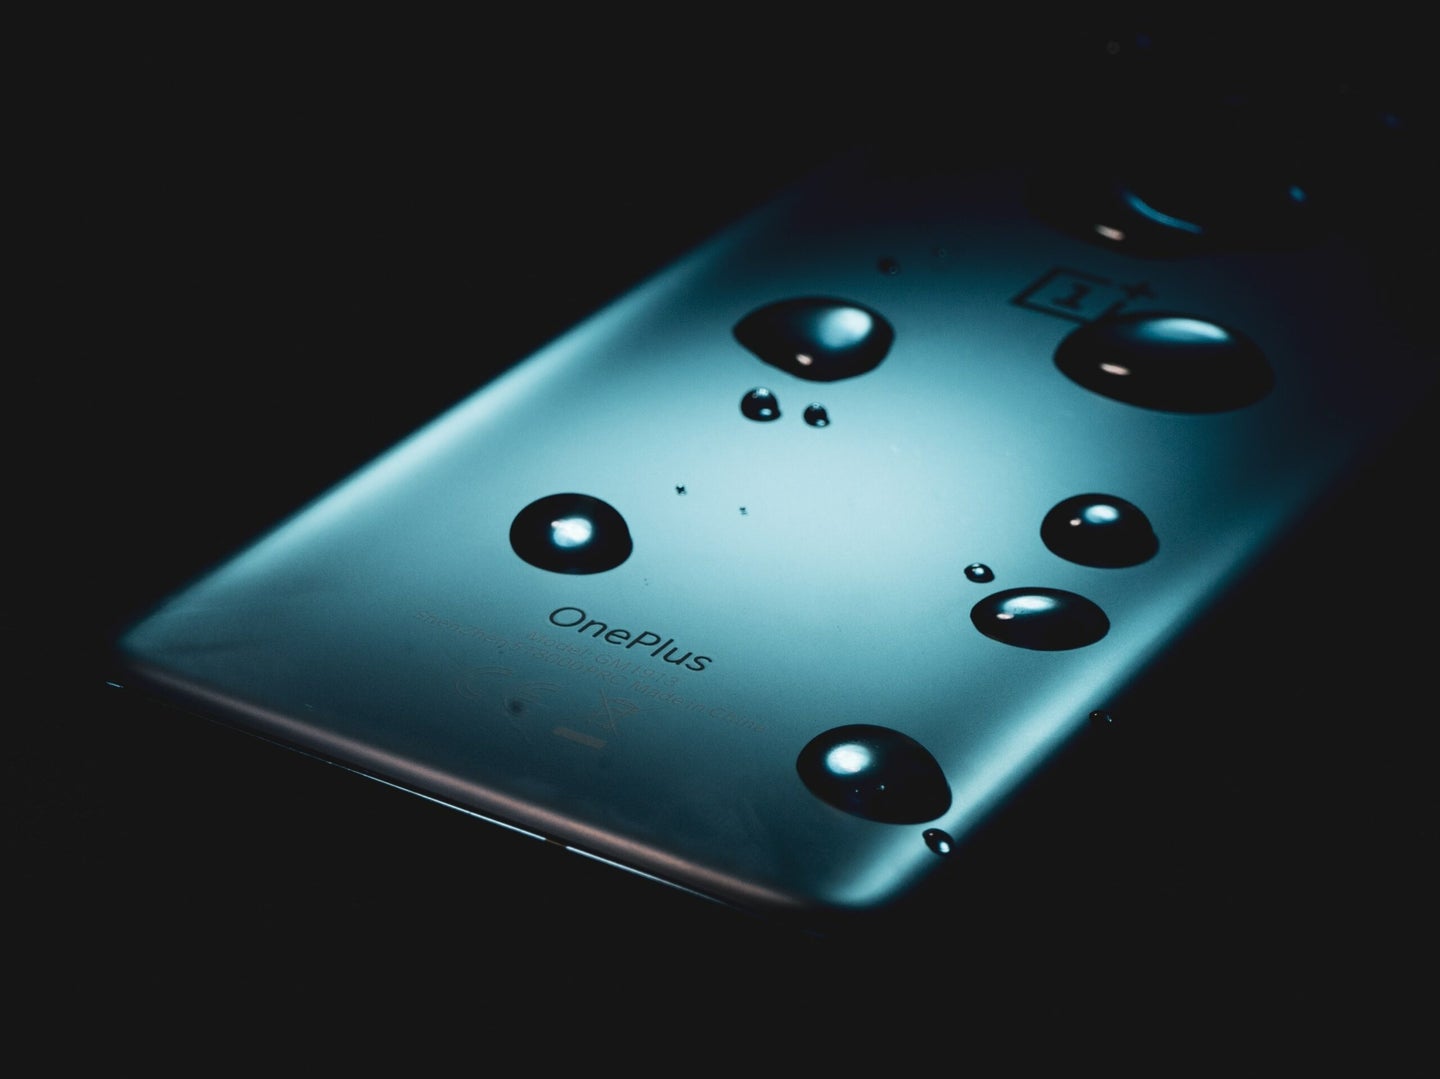 Phone with water droplets in dark